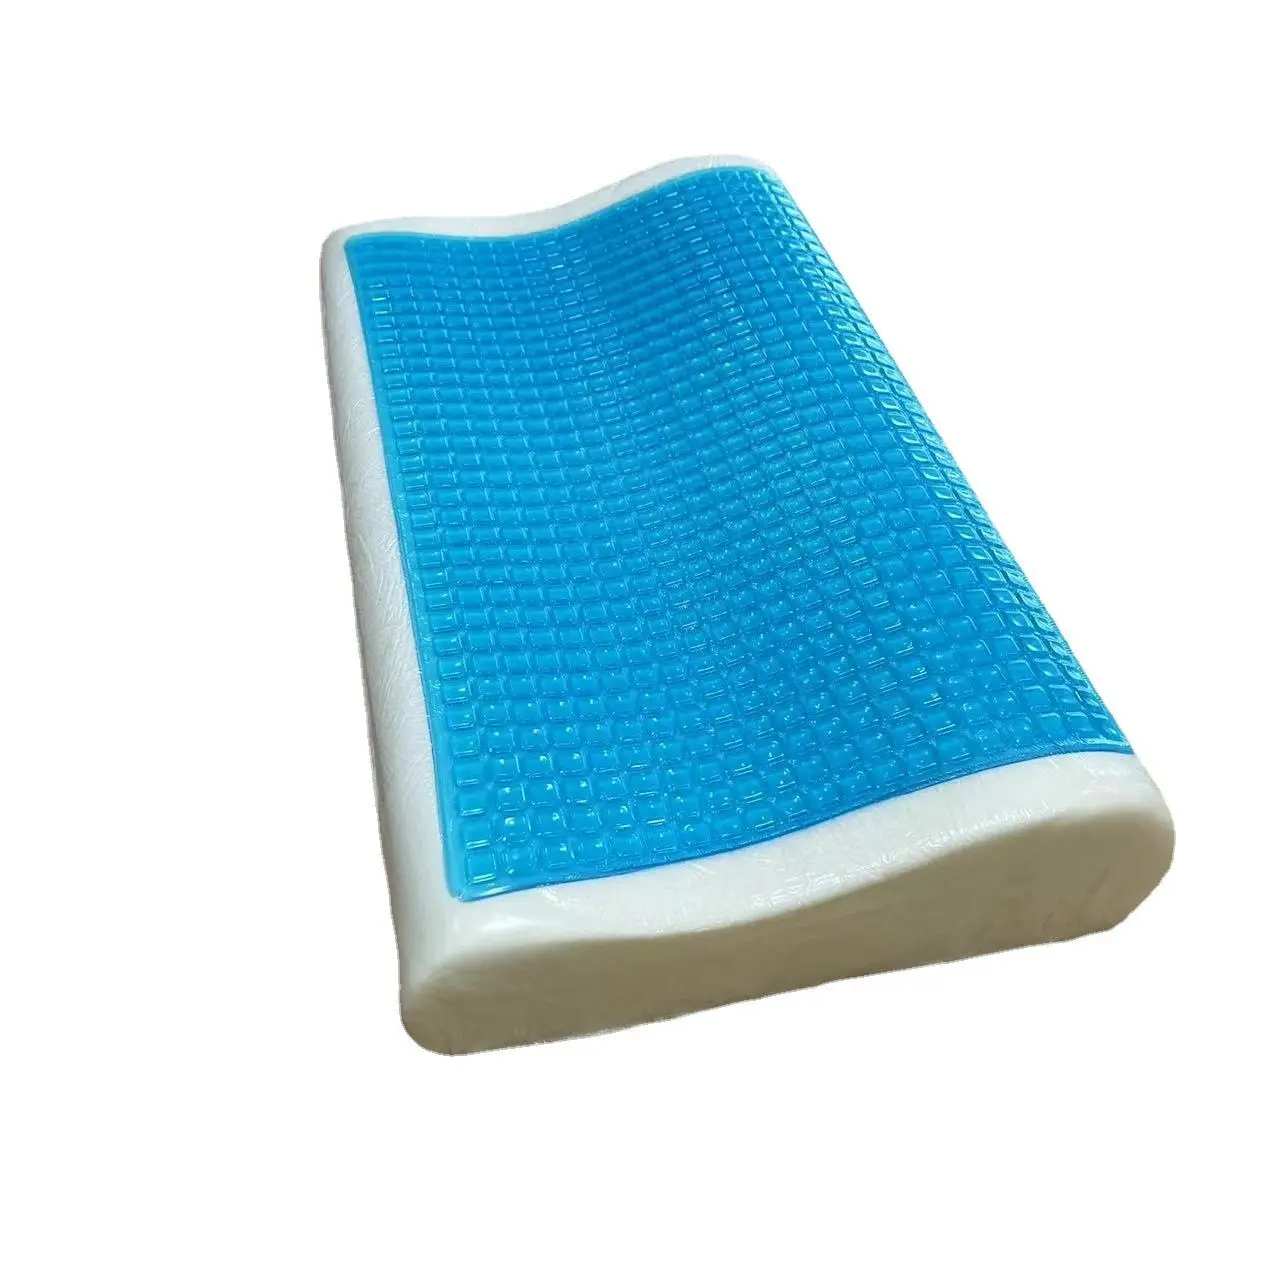 Ergonomic Orthopedic Cooling Sleeping Neck Contoured Support Pillow Cervical Gel Memory Foam Pillow For Side Sleepers